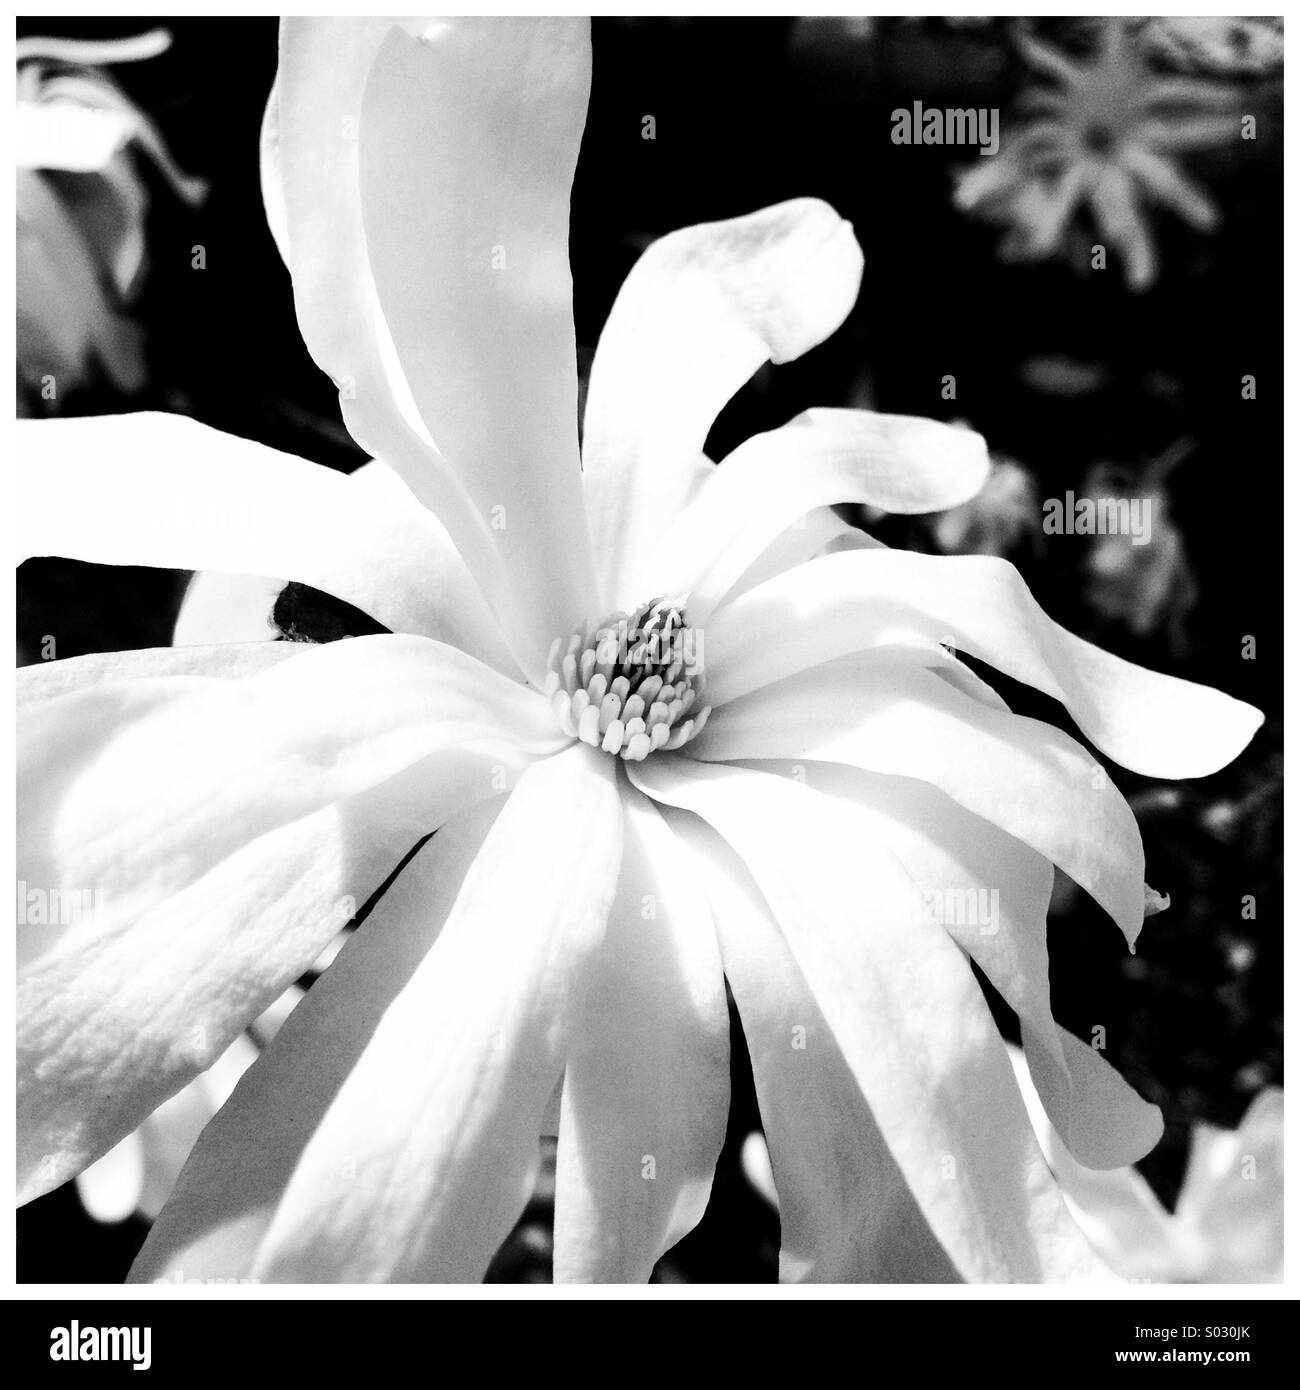 Blooming flower in black and white. Stock Photo